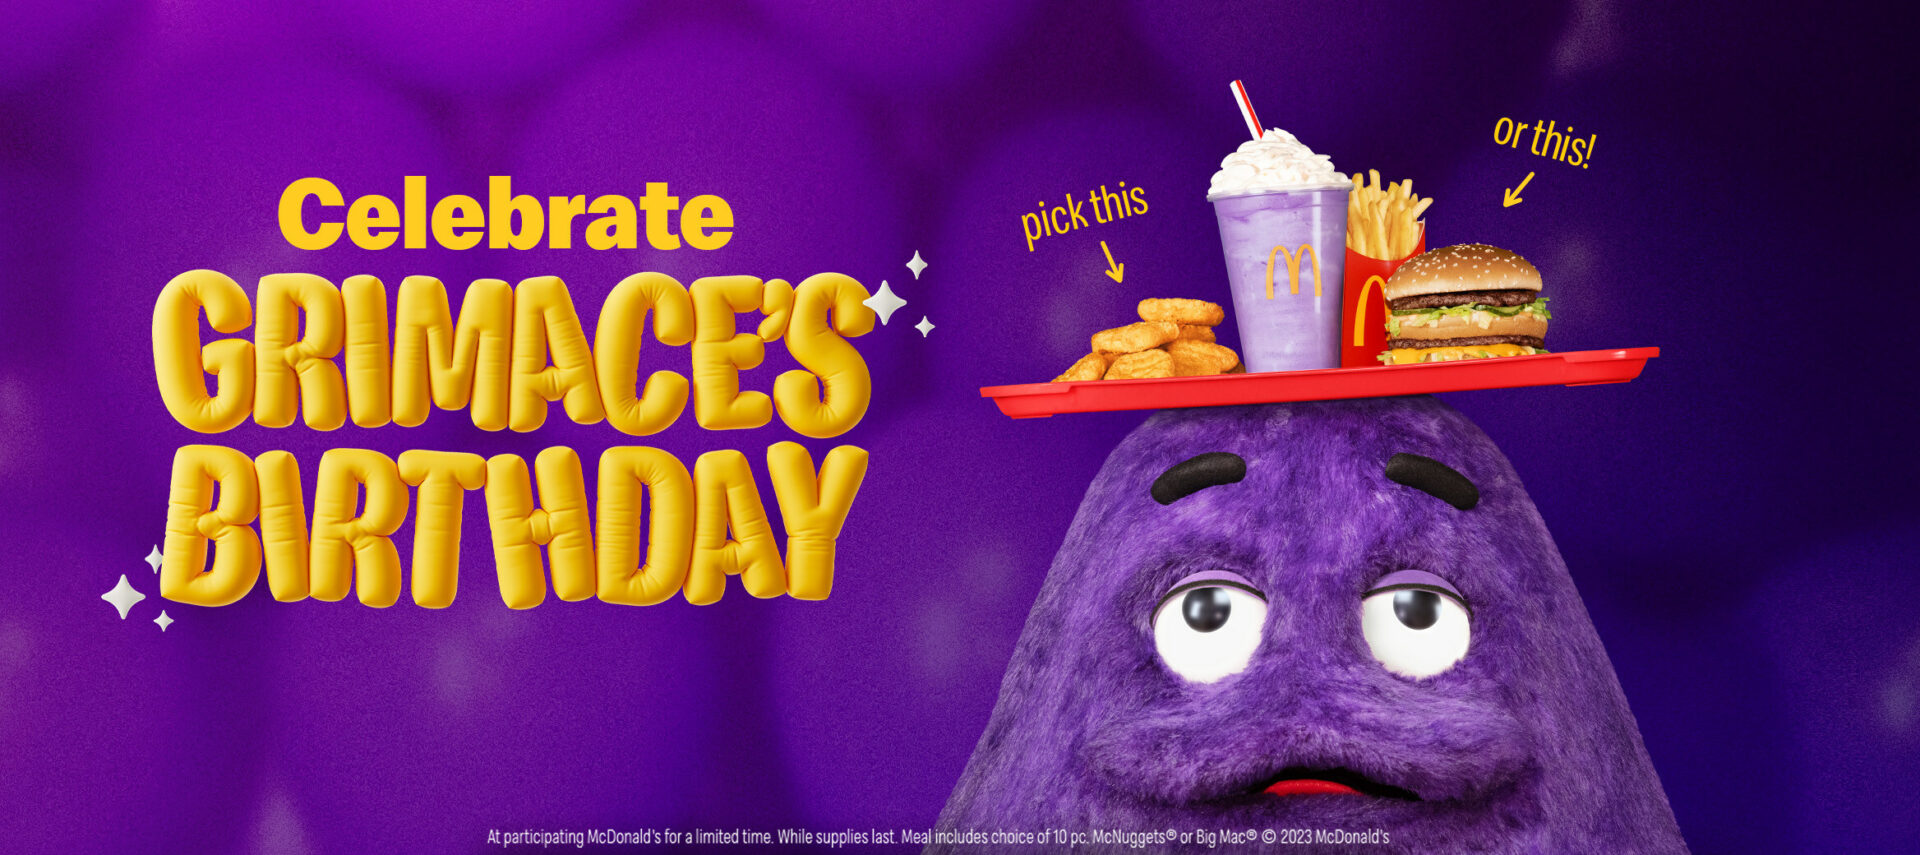 McDonald’s Celebrates Grimace’s Birthday with Special Meal & Shake